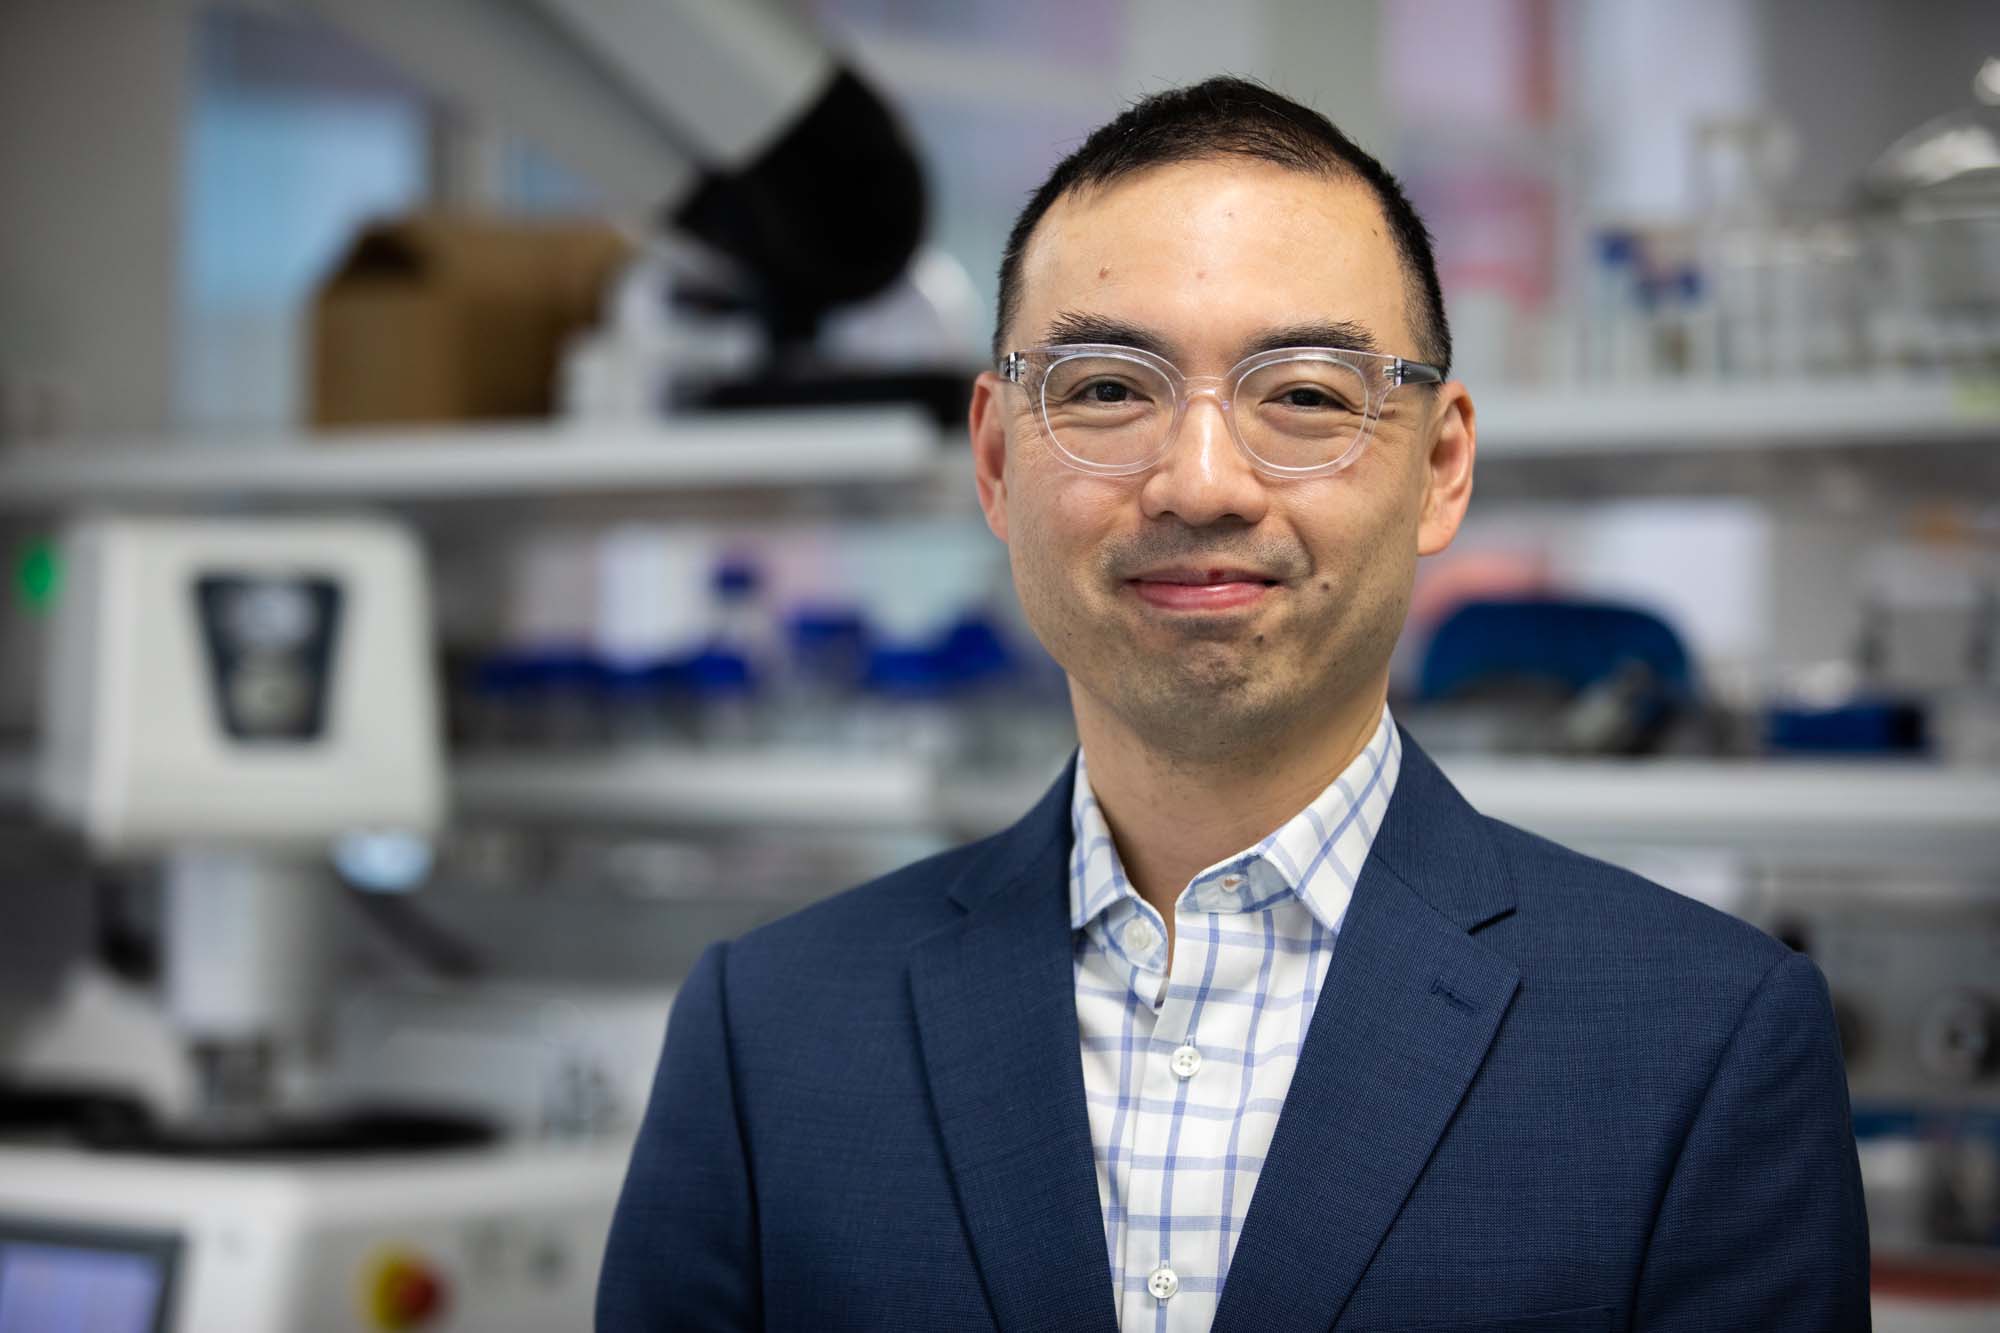 Consultant colorectal surgeon at Western Health and Professor of Surgery at the University of Melbourne, Justin Yeung, was involved in the study. 